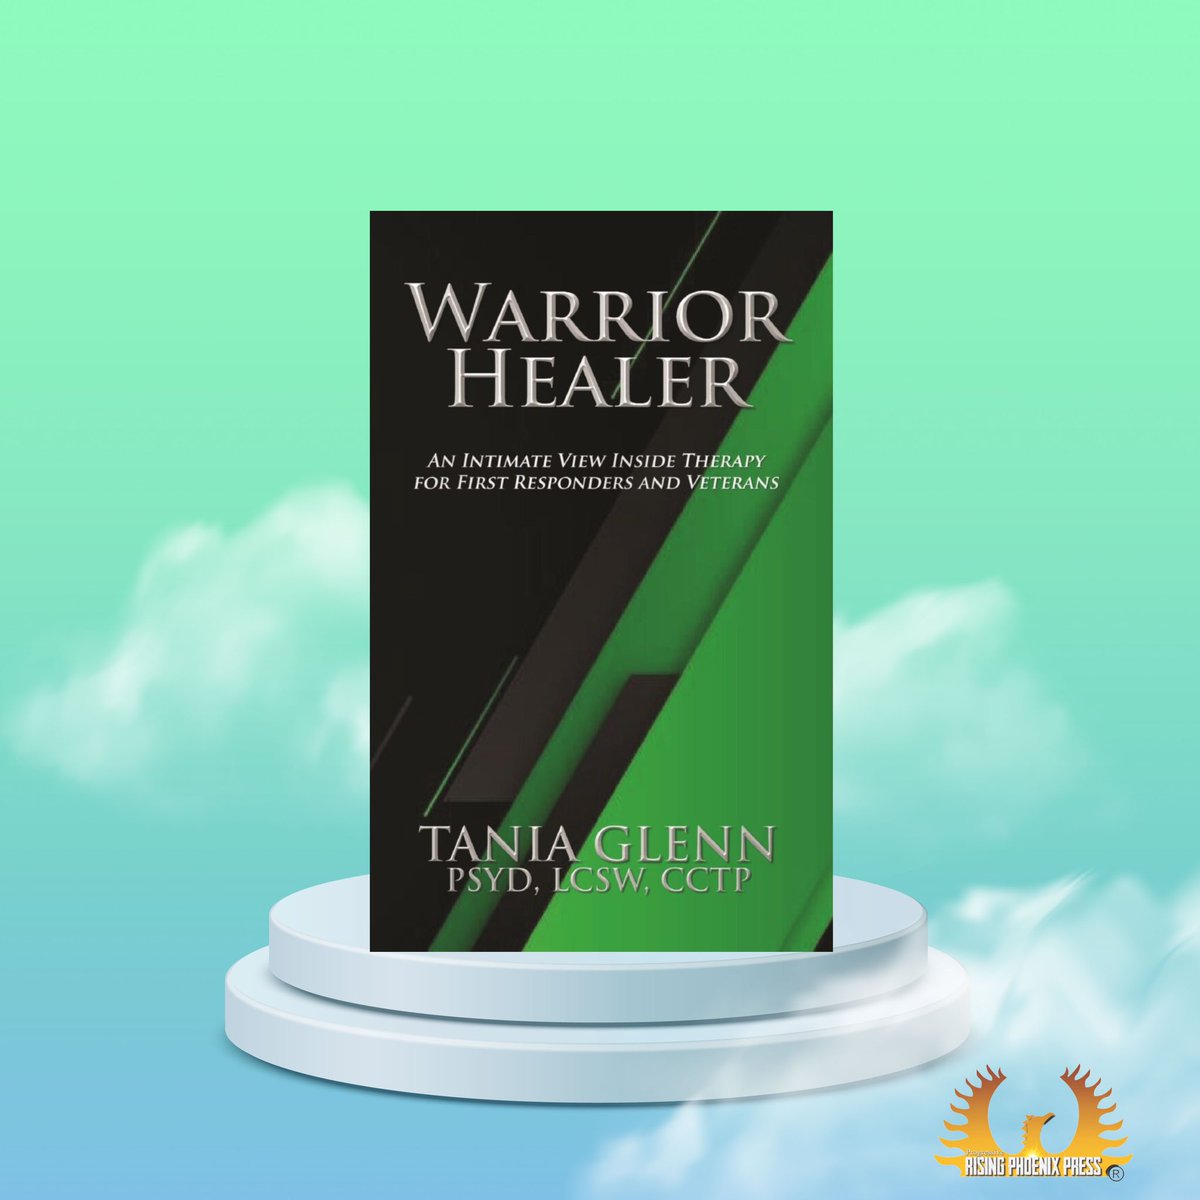 “I have had so many impactful patients throughout my career, so I asked six of the most inspirational ones if they would share their stories.” - Tania Glenn Progressiverisingphoenix.com #wellnesswarrior #mentalhealthawareness #ptsd #firstresponders  #ptsdawareness #ptsdrecovery